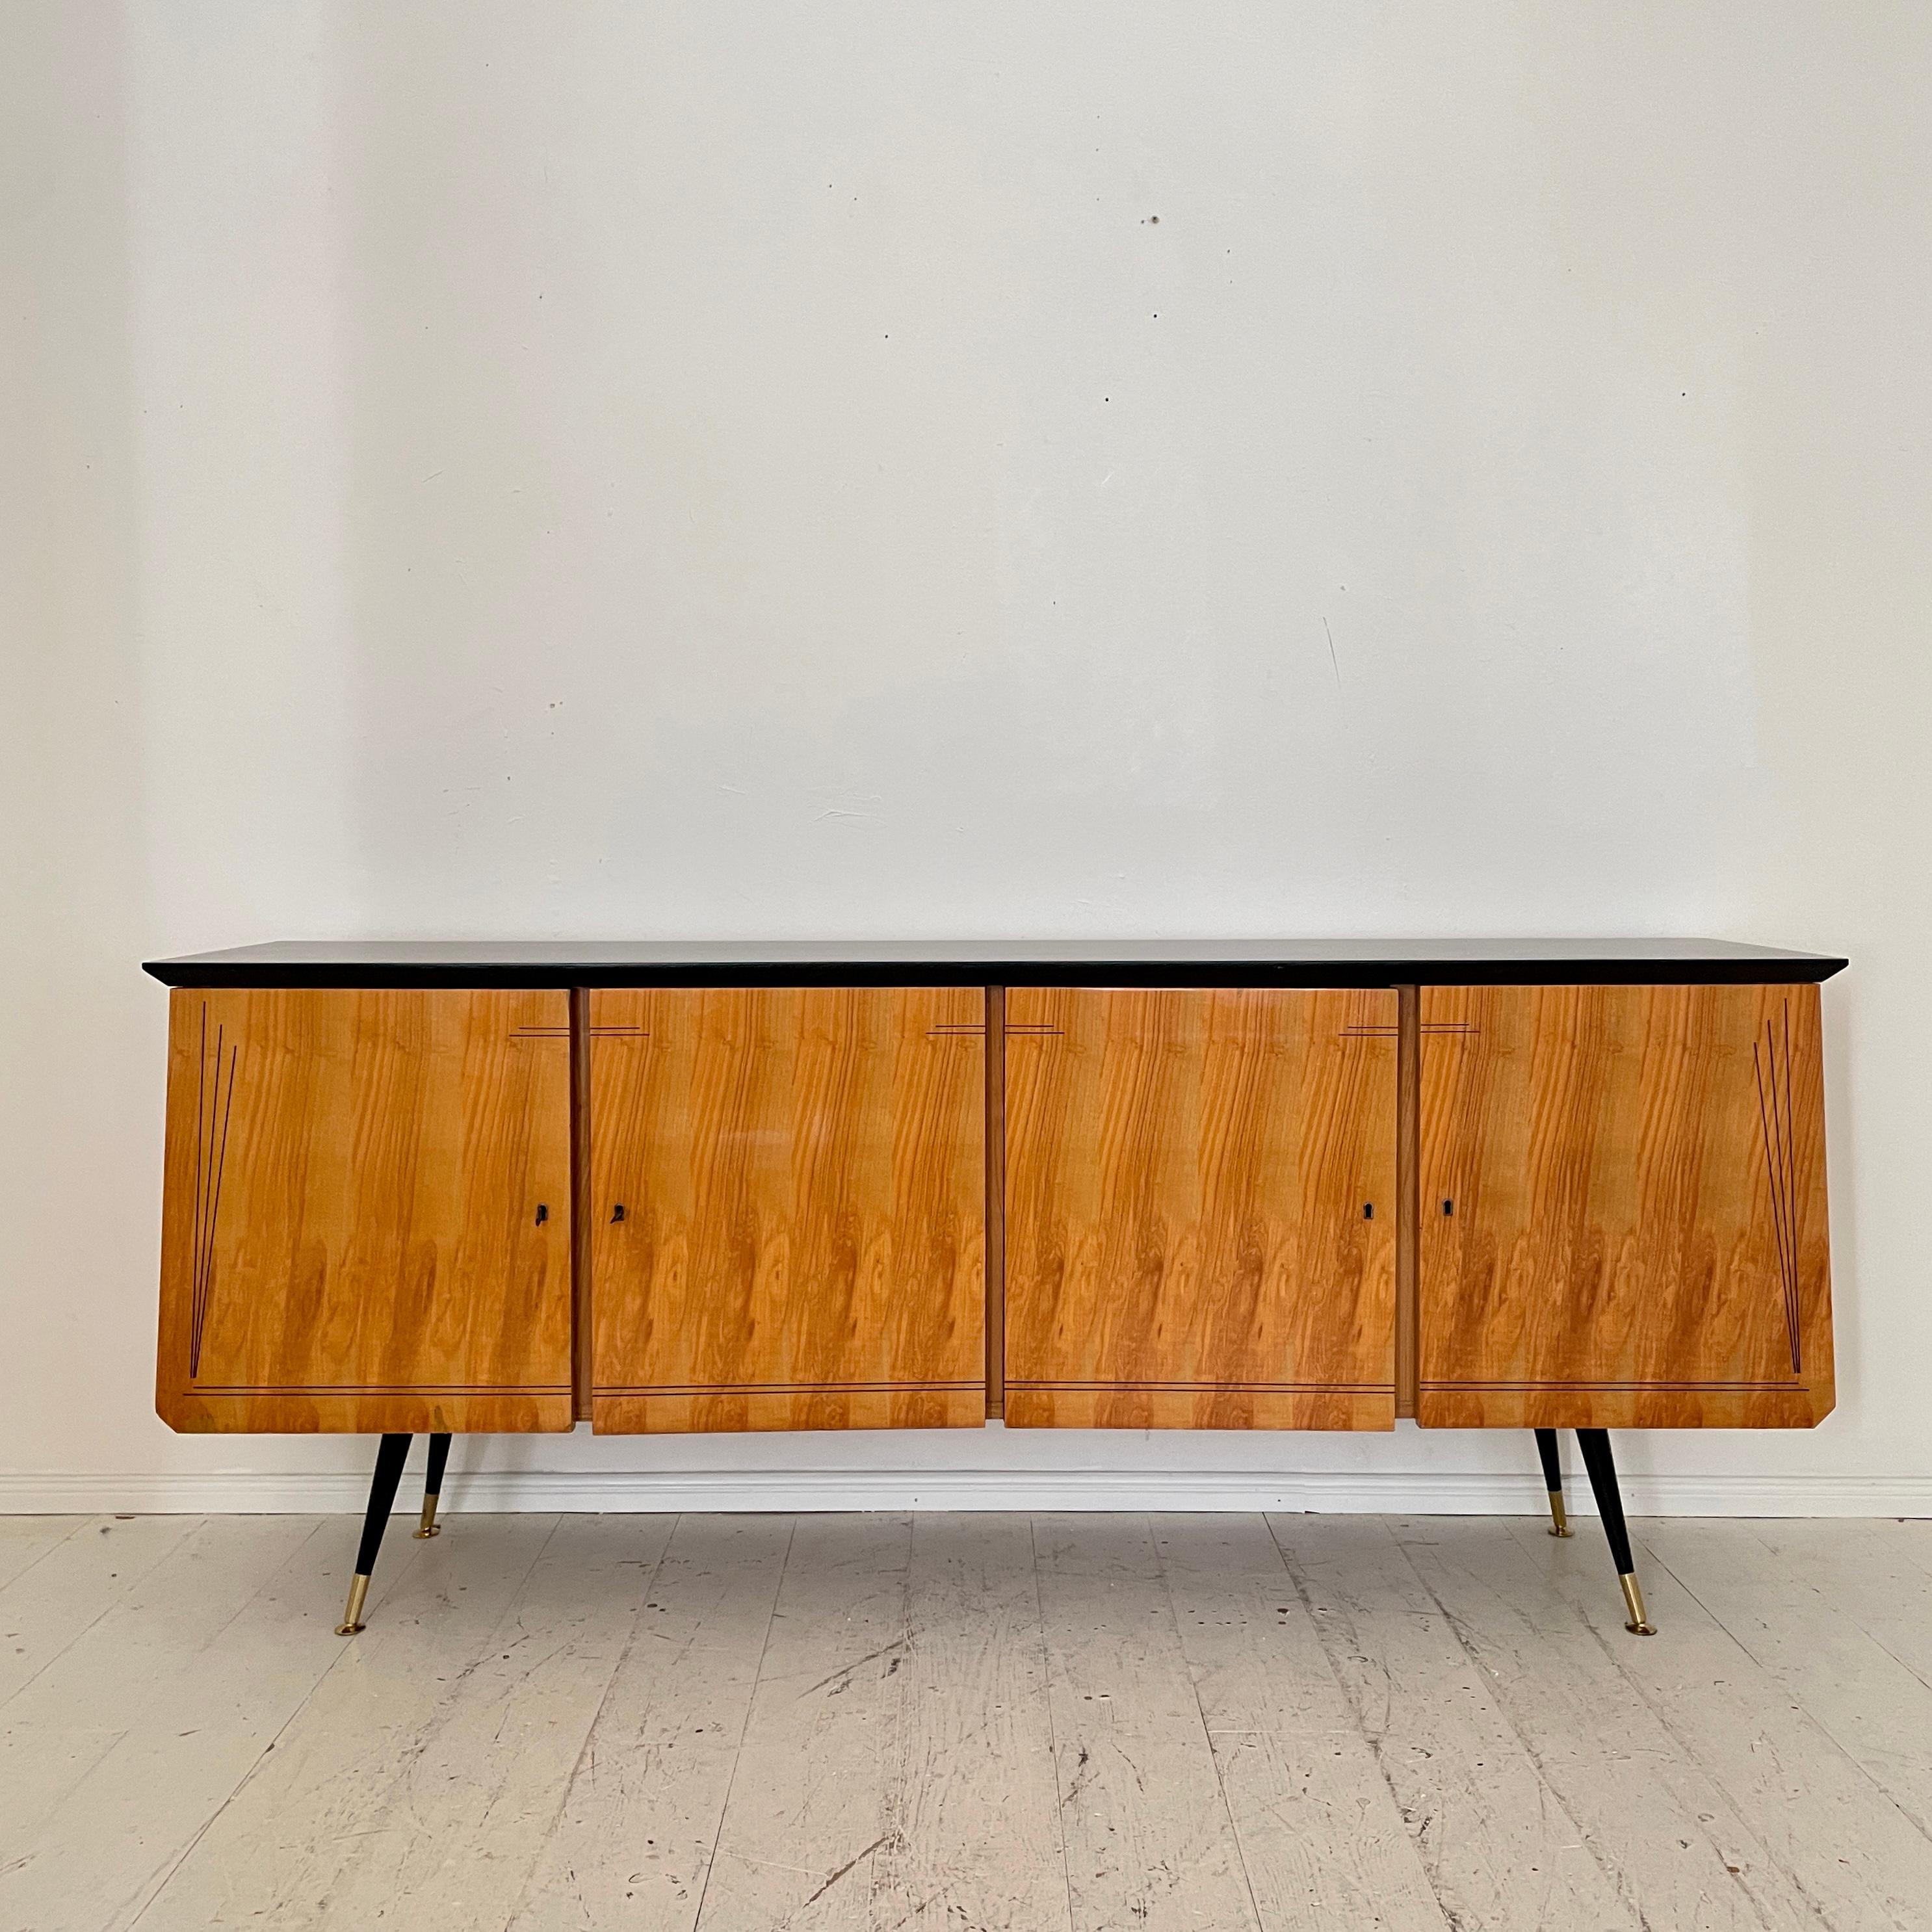 This beautiful Italian midcentury Sideboard was made around 1950.
It has got 4 Doors and is veneered in ash, and the top is lacquered black. The black lacquered tapered legs have got brass shoes.
A unique piece which is a great eye-catcher for